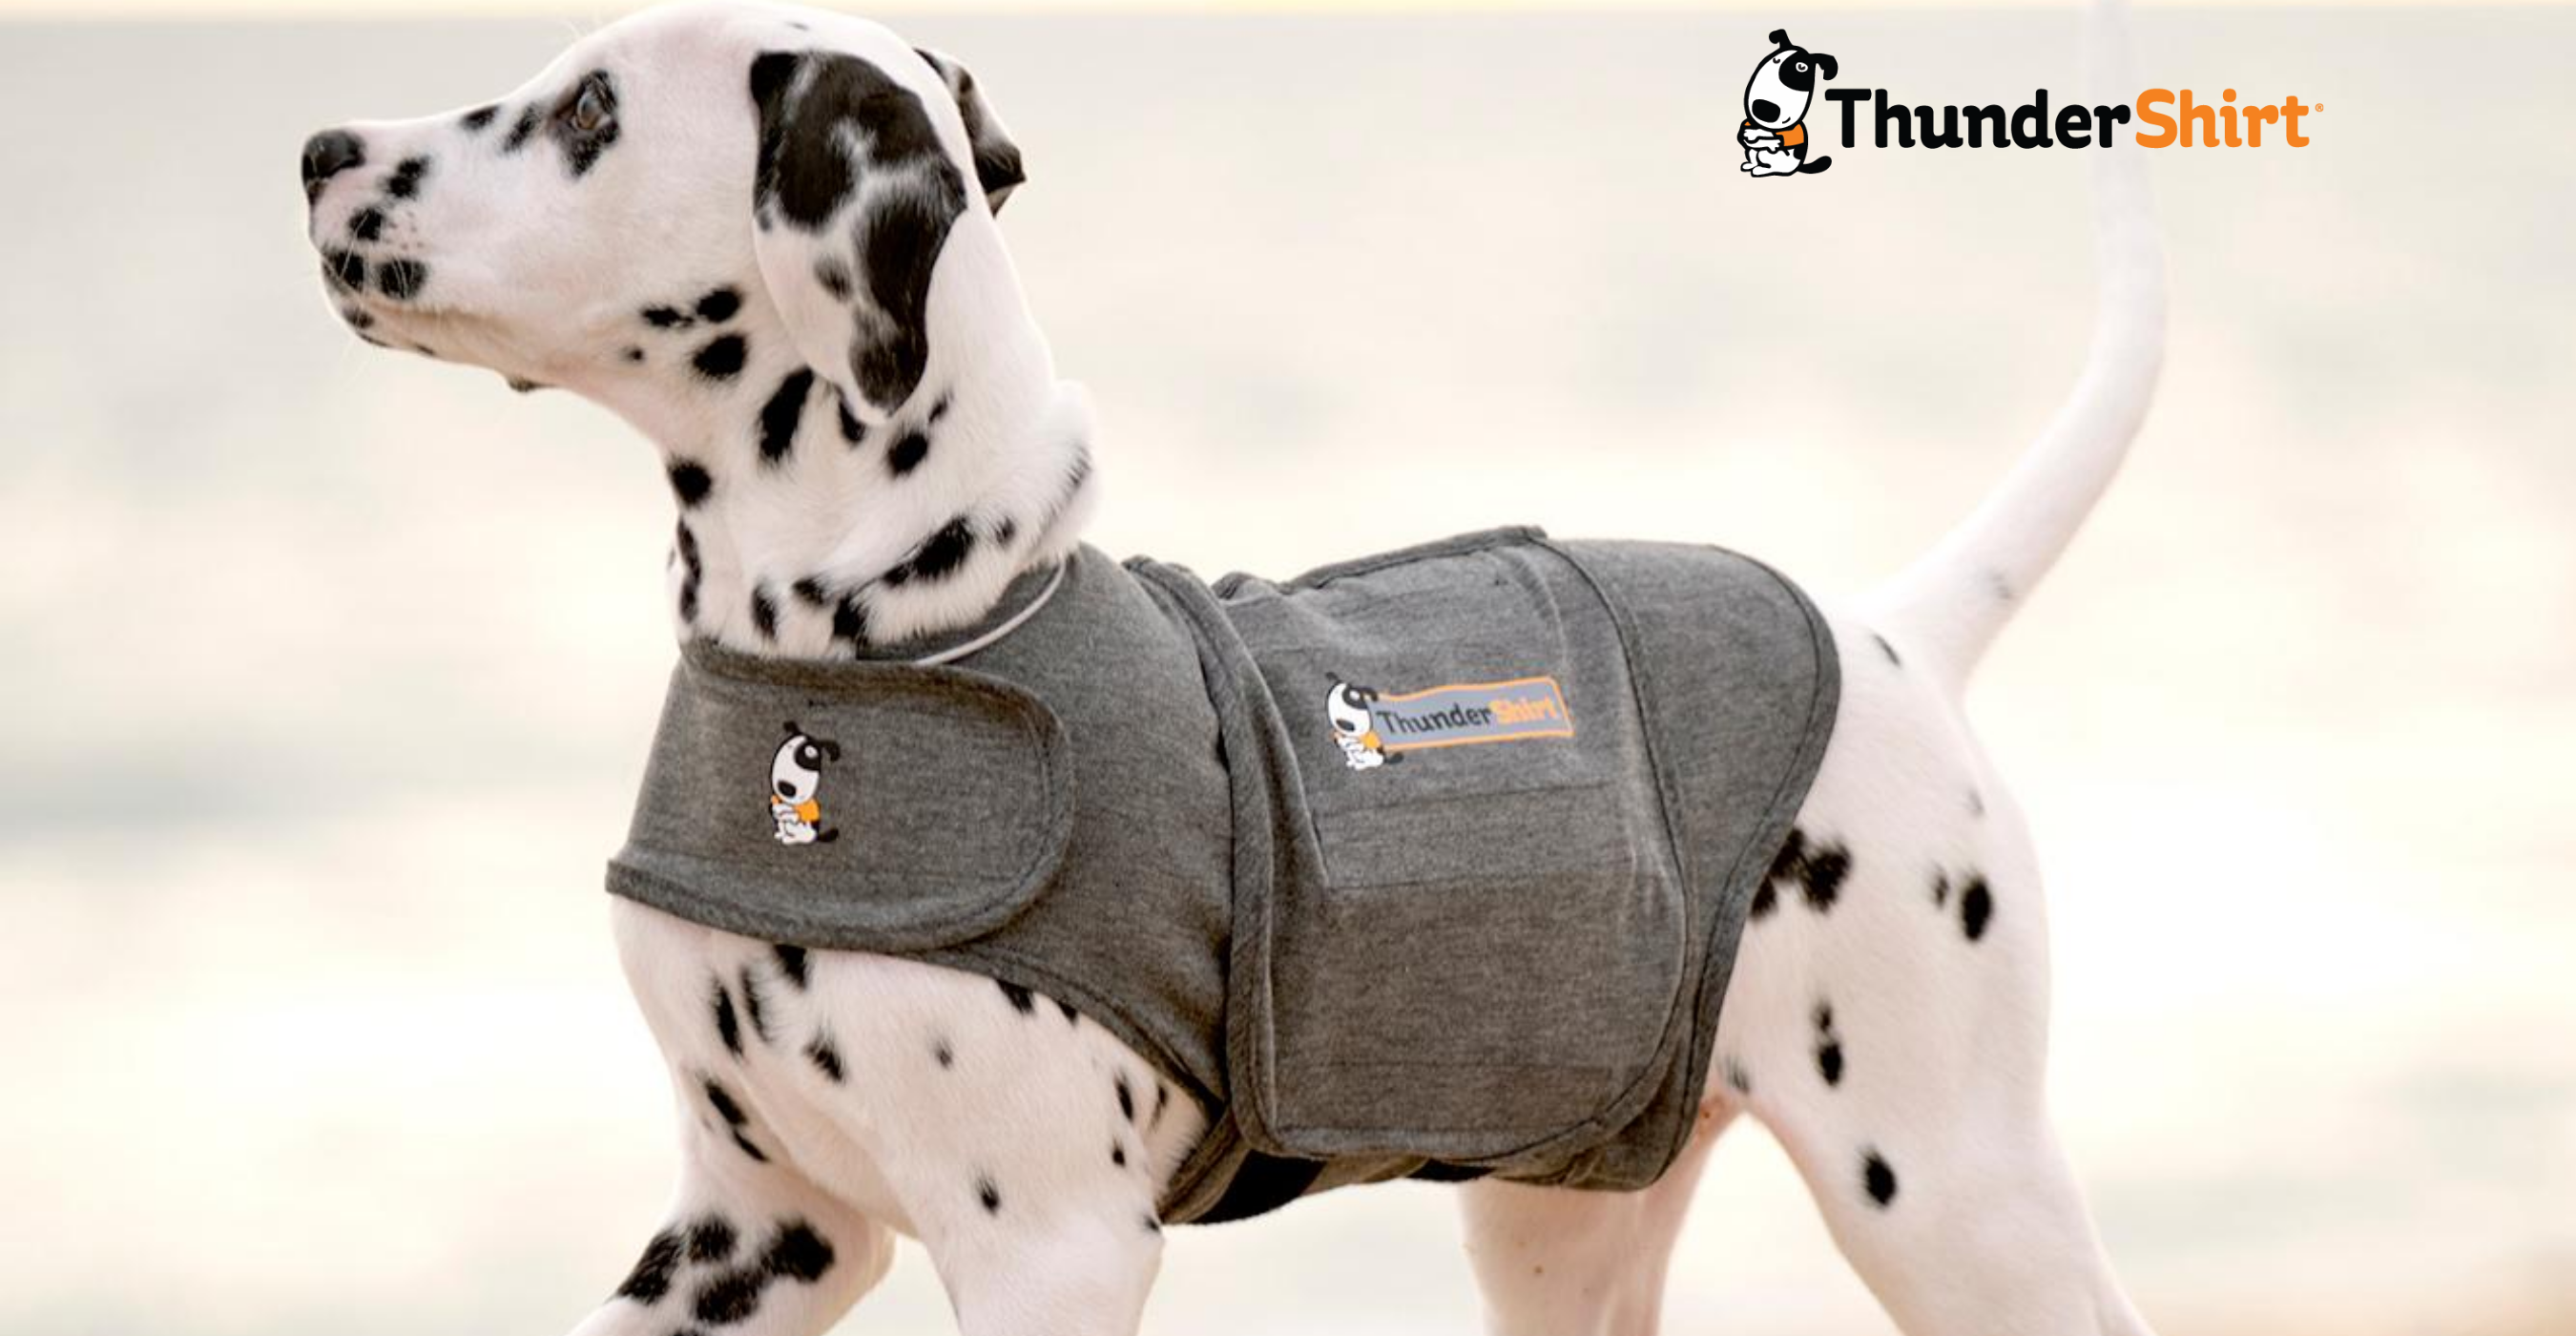 Copy of Thundershirt what is it (1)